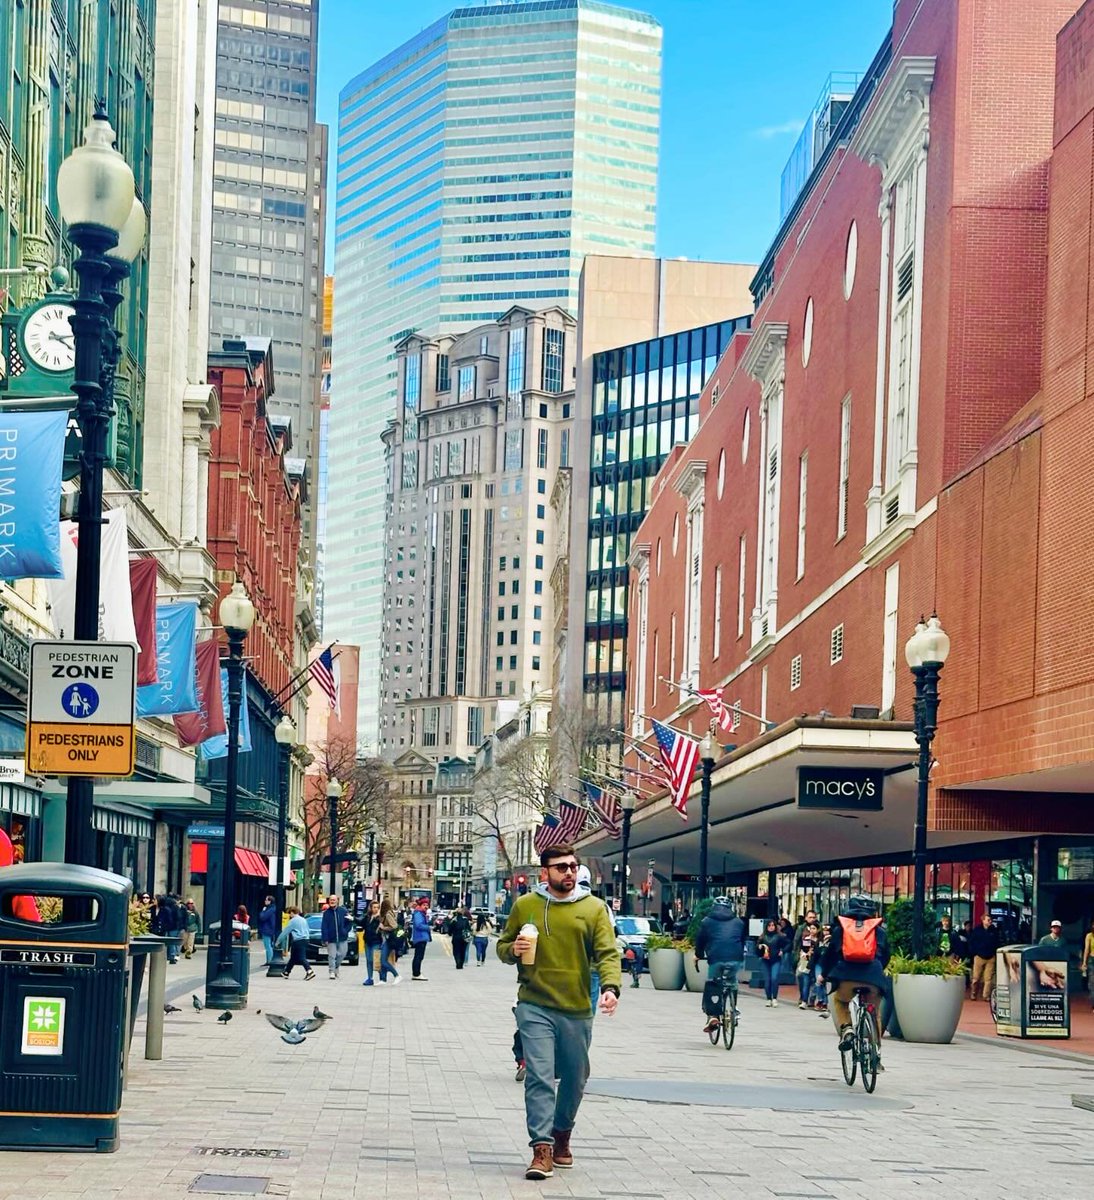 The iconic view down an active Summer Street is hard to beat 🤩 #DowntownBoston

📸 Bruno Araújo Braga